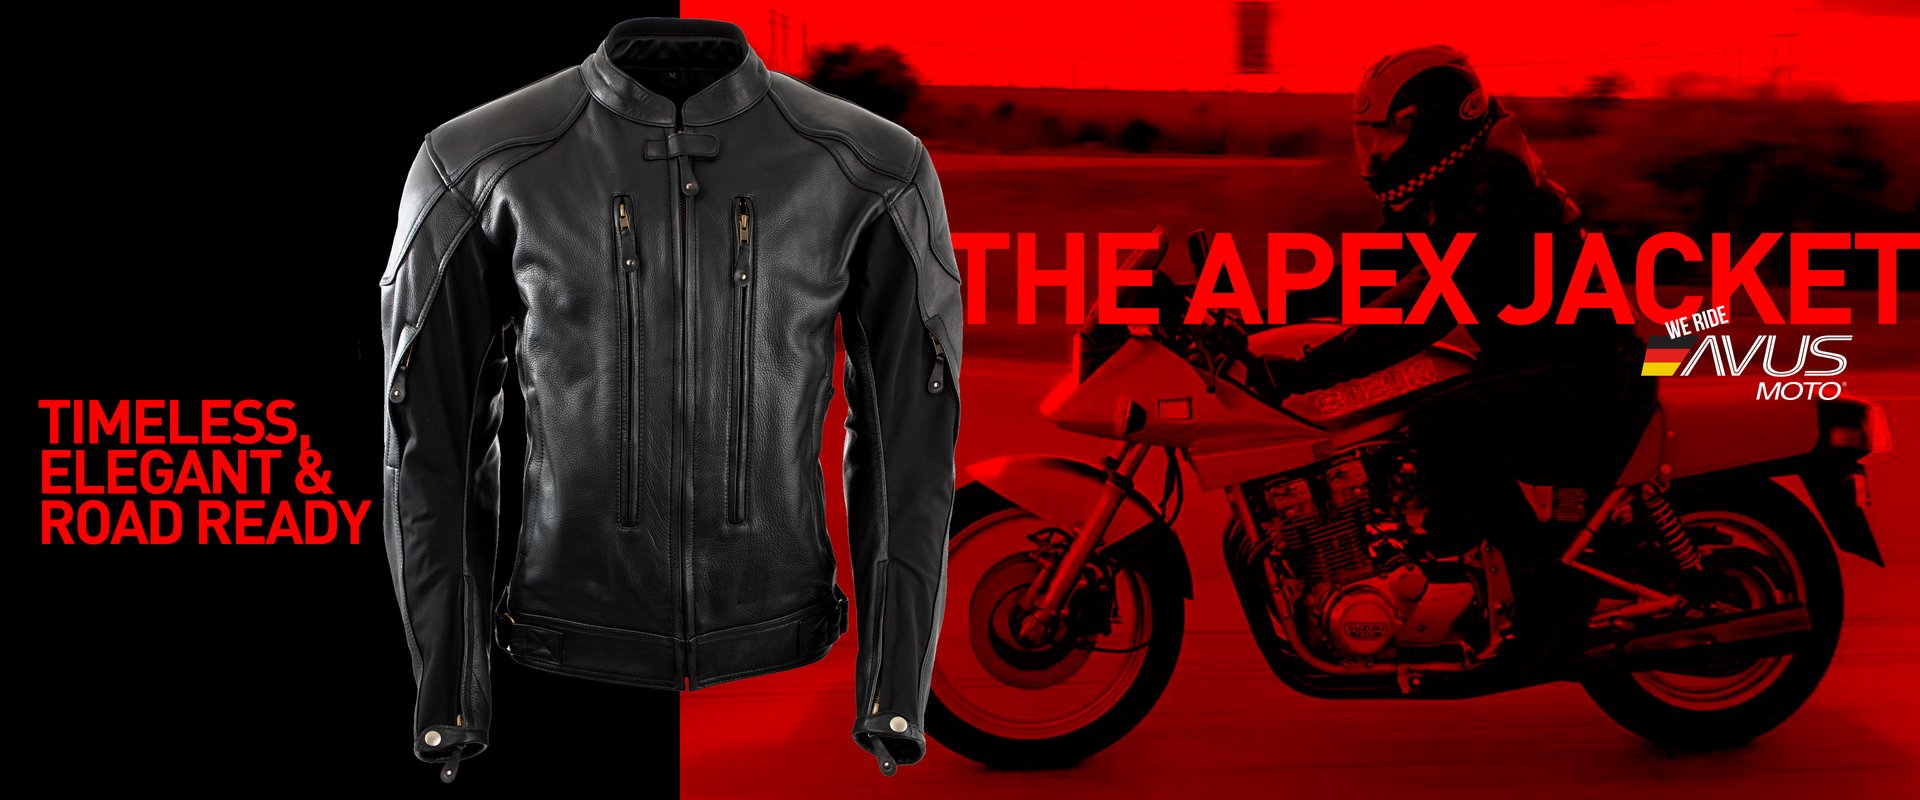 Clothing and accessories for motorcyclists